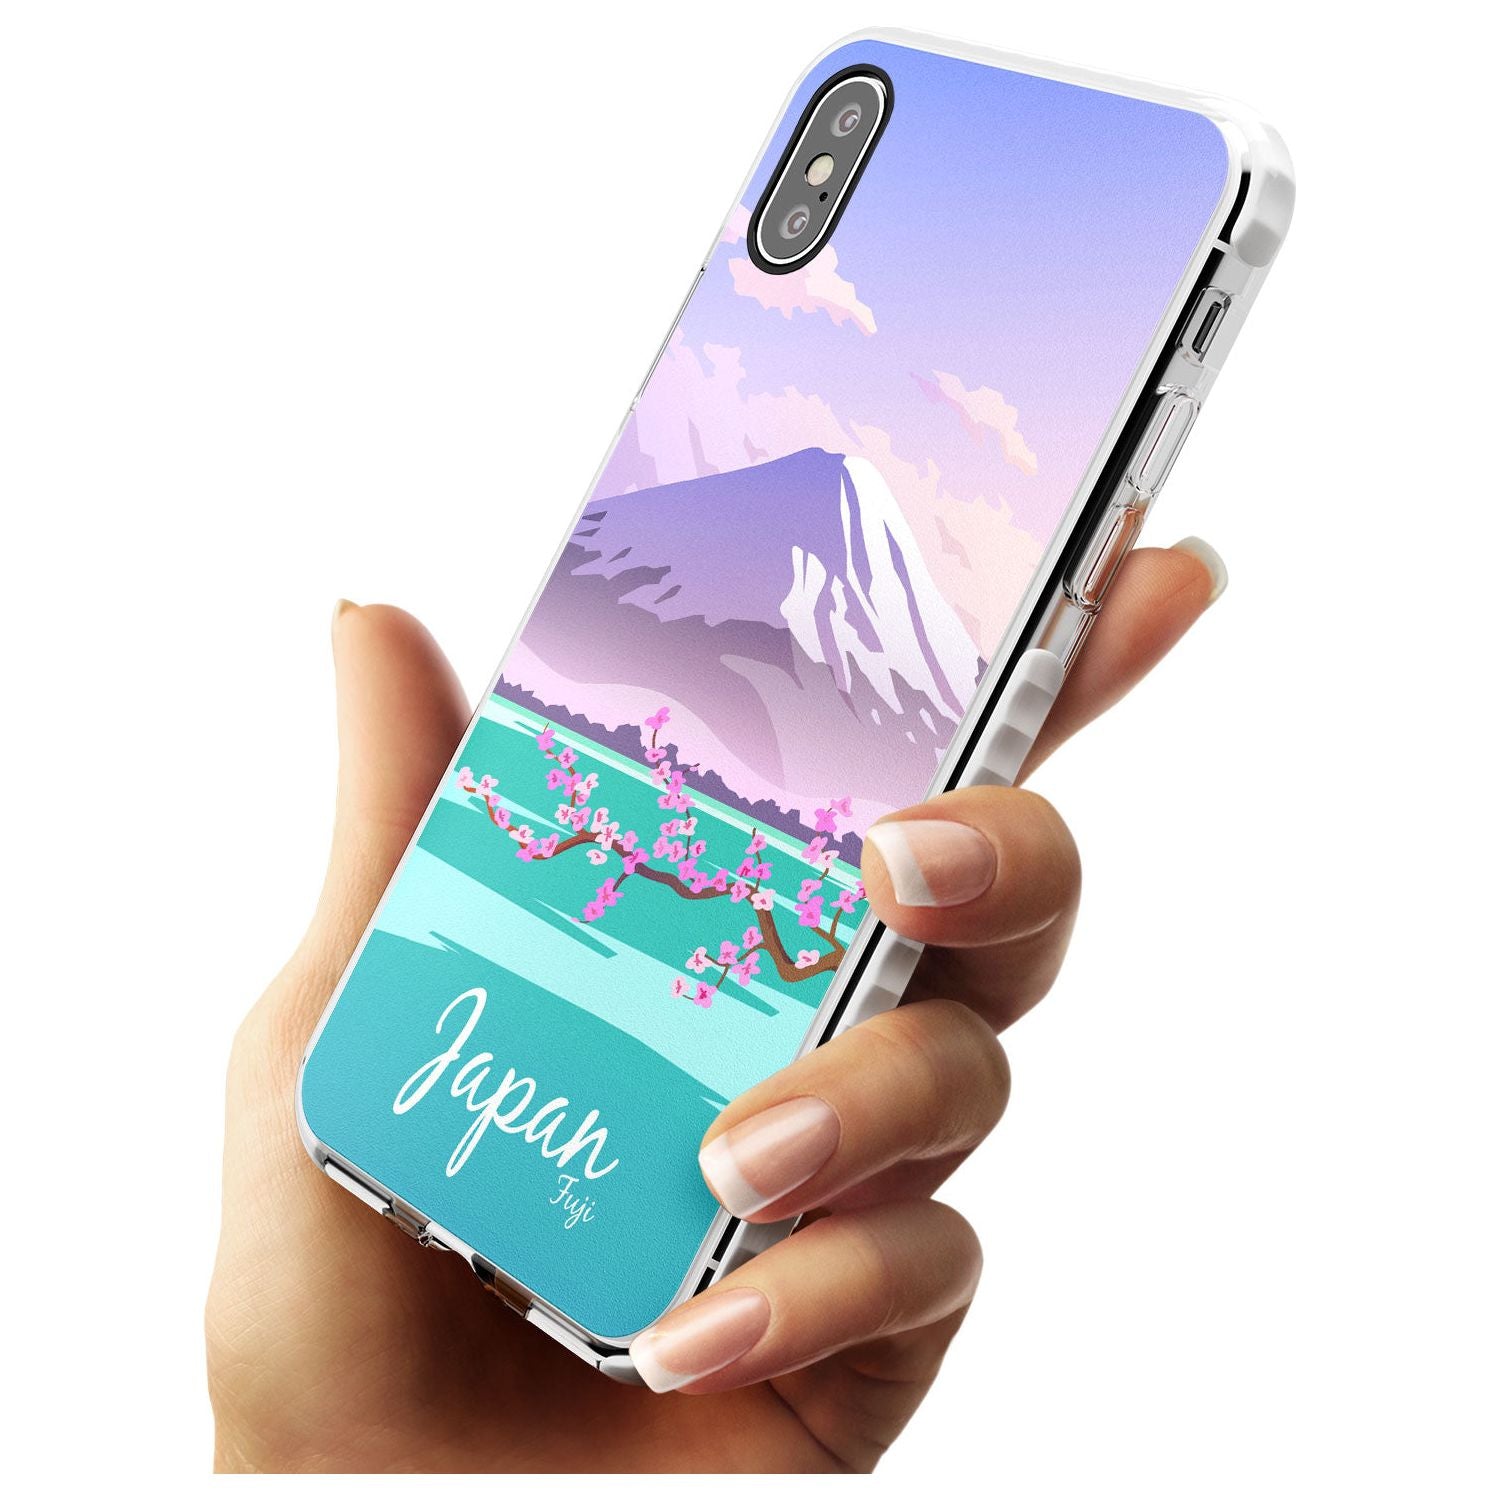 Vintage Travel Poster Japan Impact Phone Case for iPhone X XS Max XR